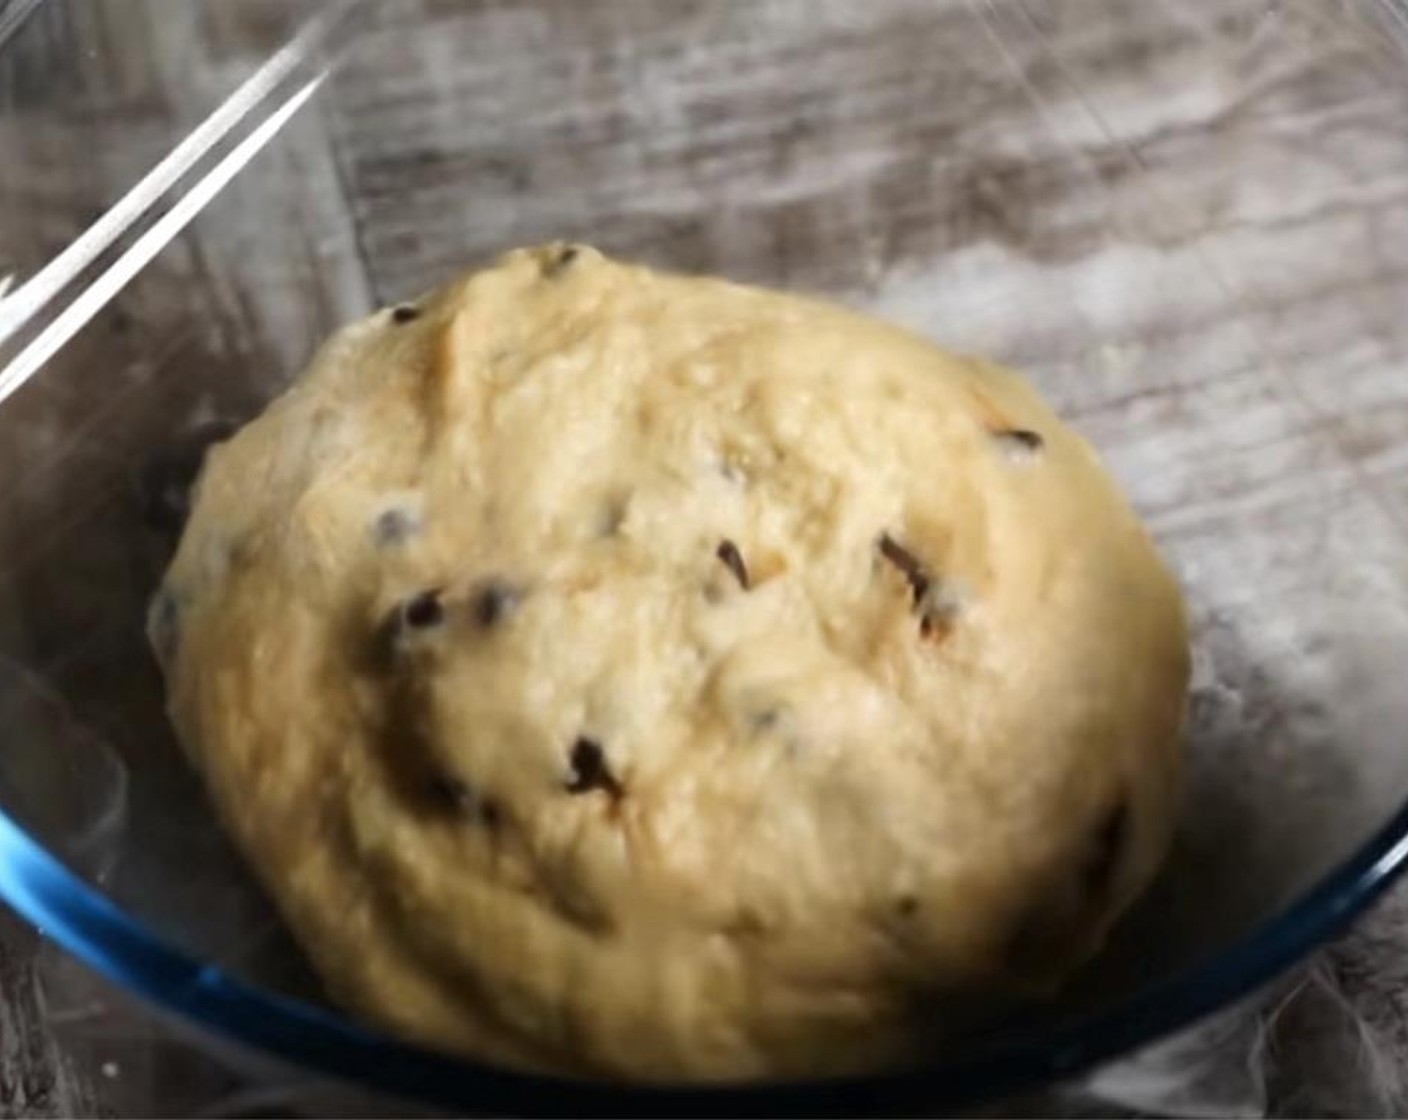 step 10 Once you are happy with the consistency of the dough for your Italian Hot Cross Buns, place it into a bowl and seal it tightly with cling film. Leave it to rise overnight to ensure a really moist result.